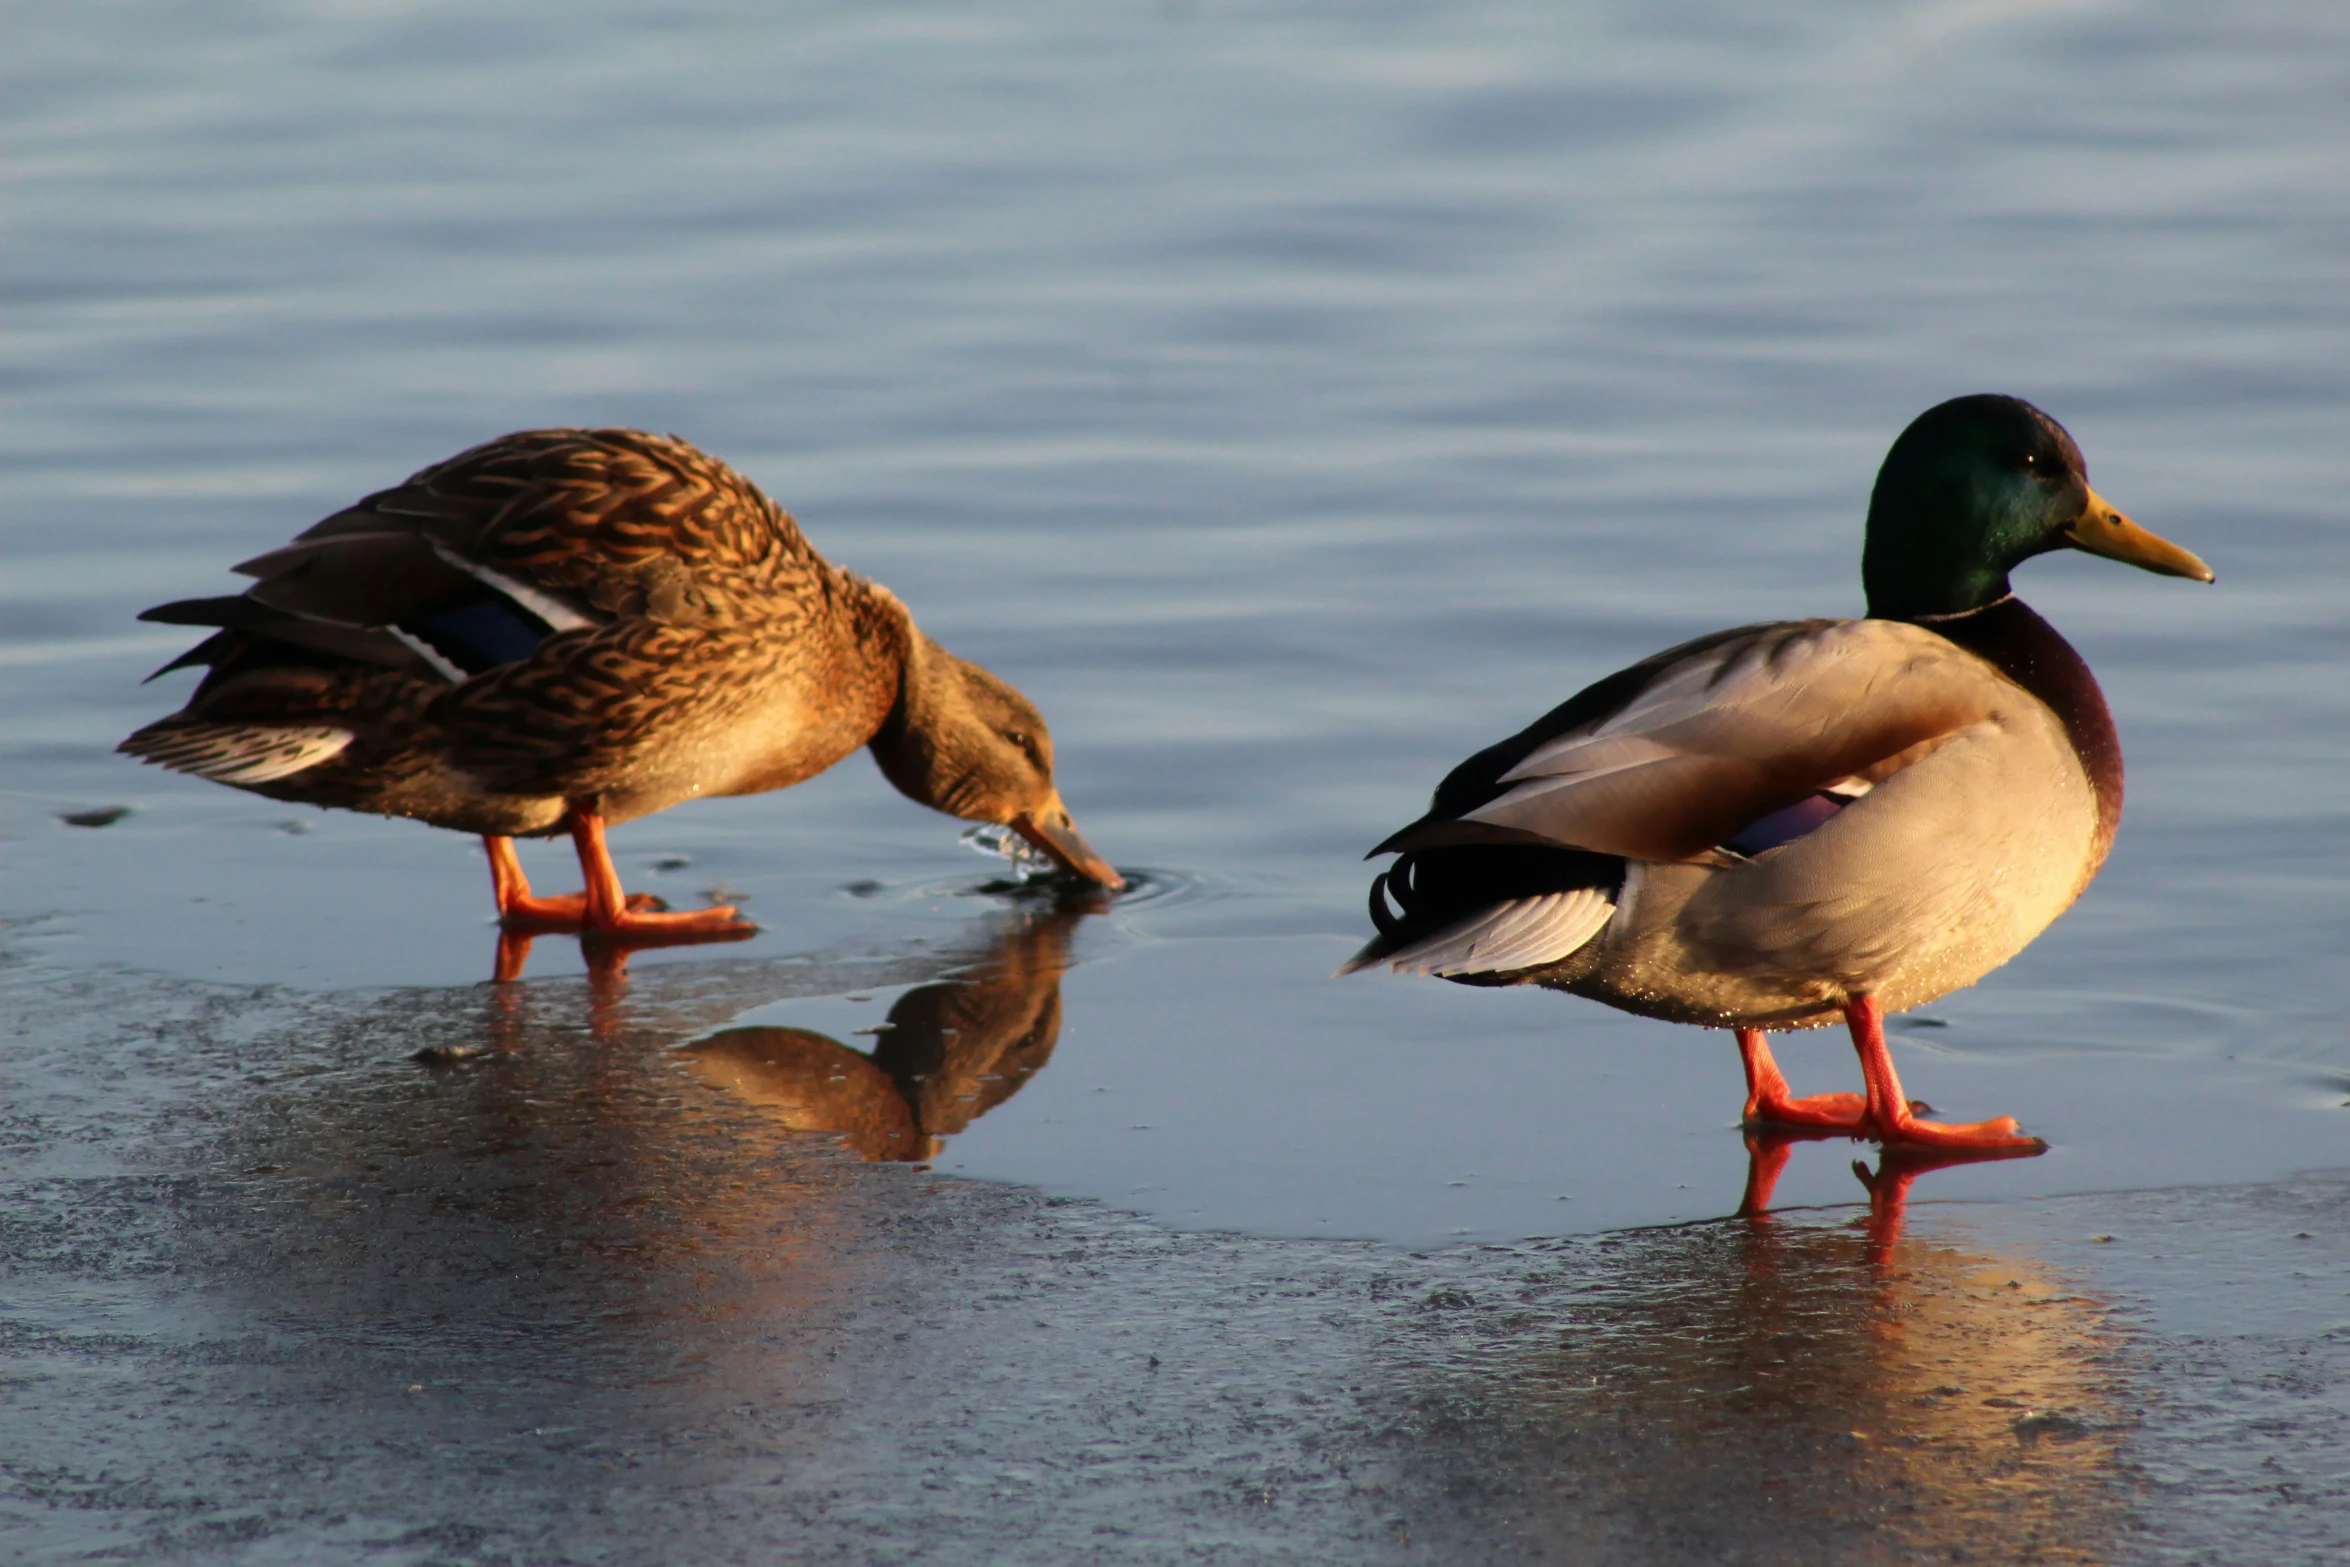 two ducks are sitting on ice while one is standing